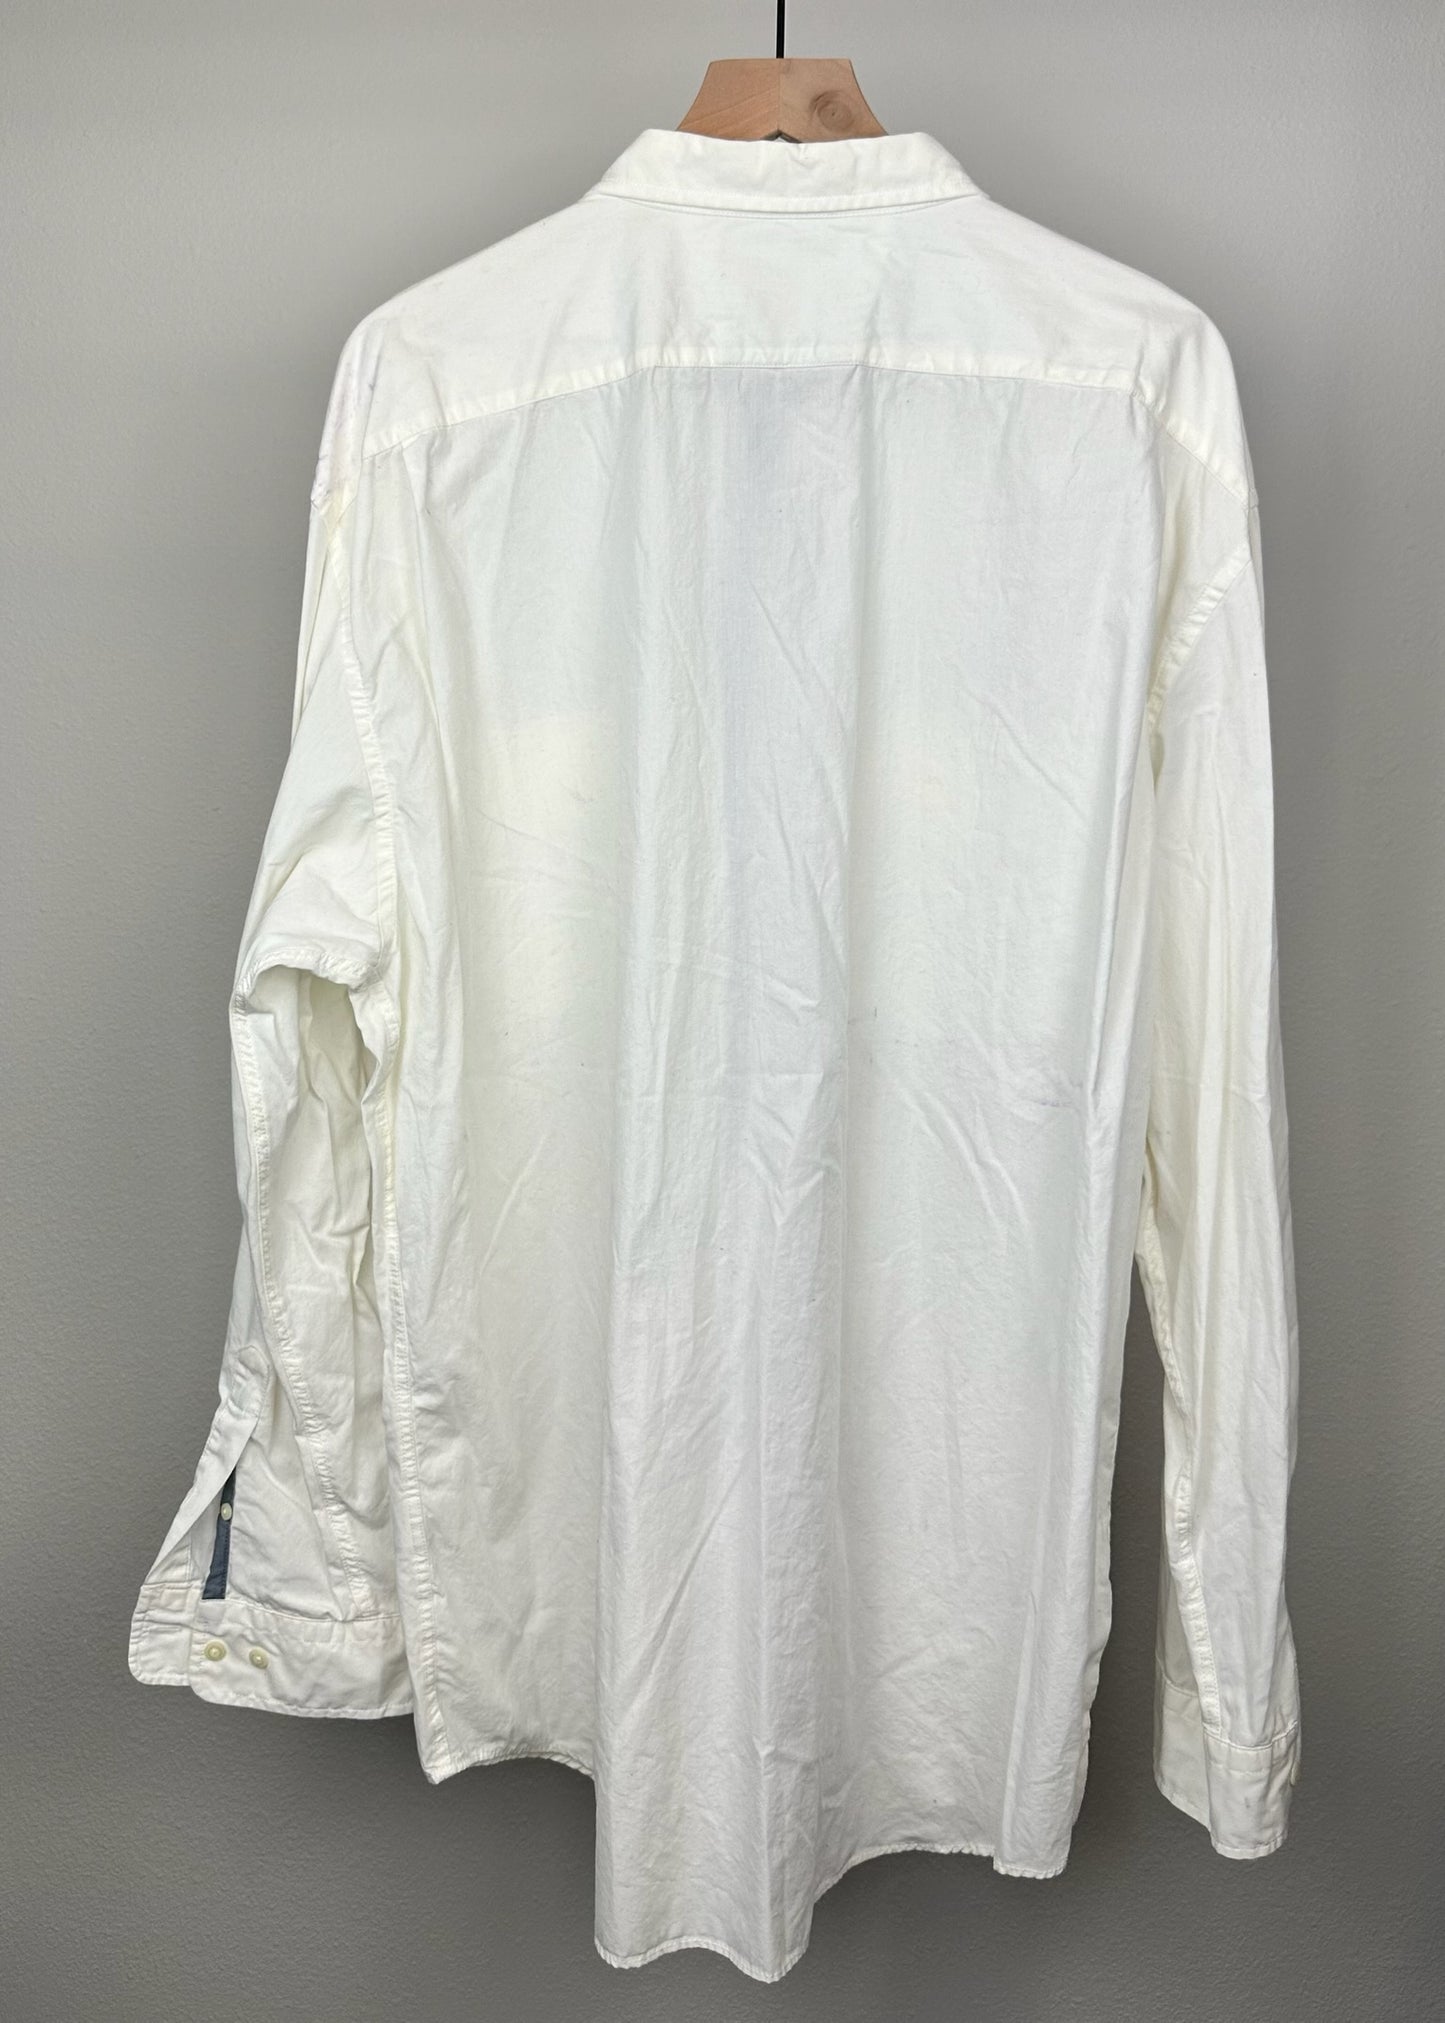 White Long Sleeve Button Up By Nautica